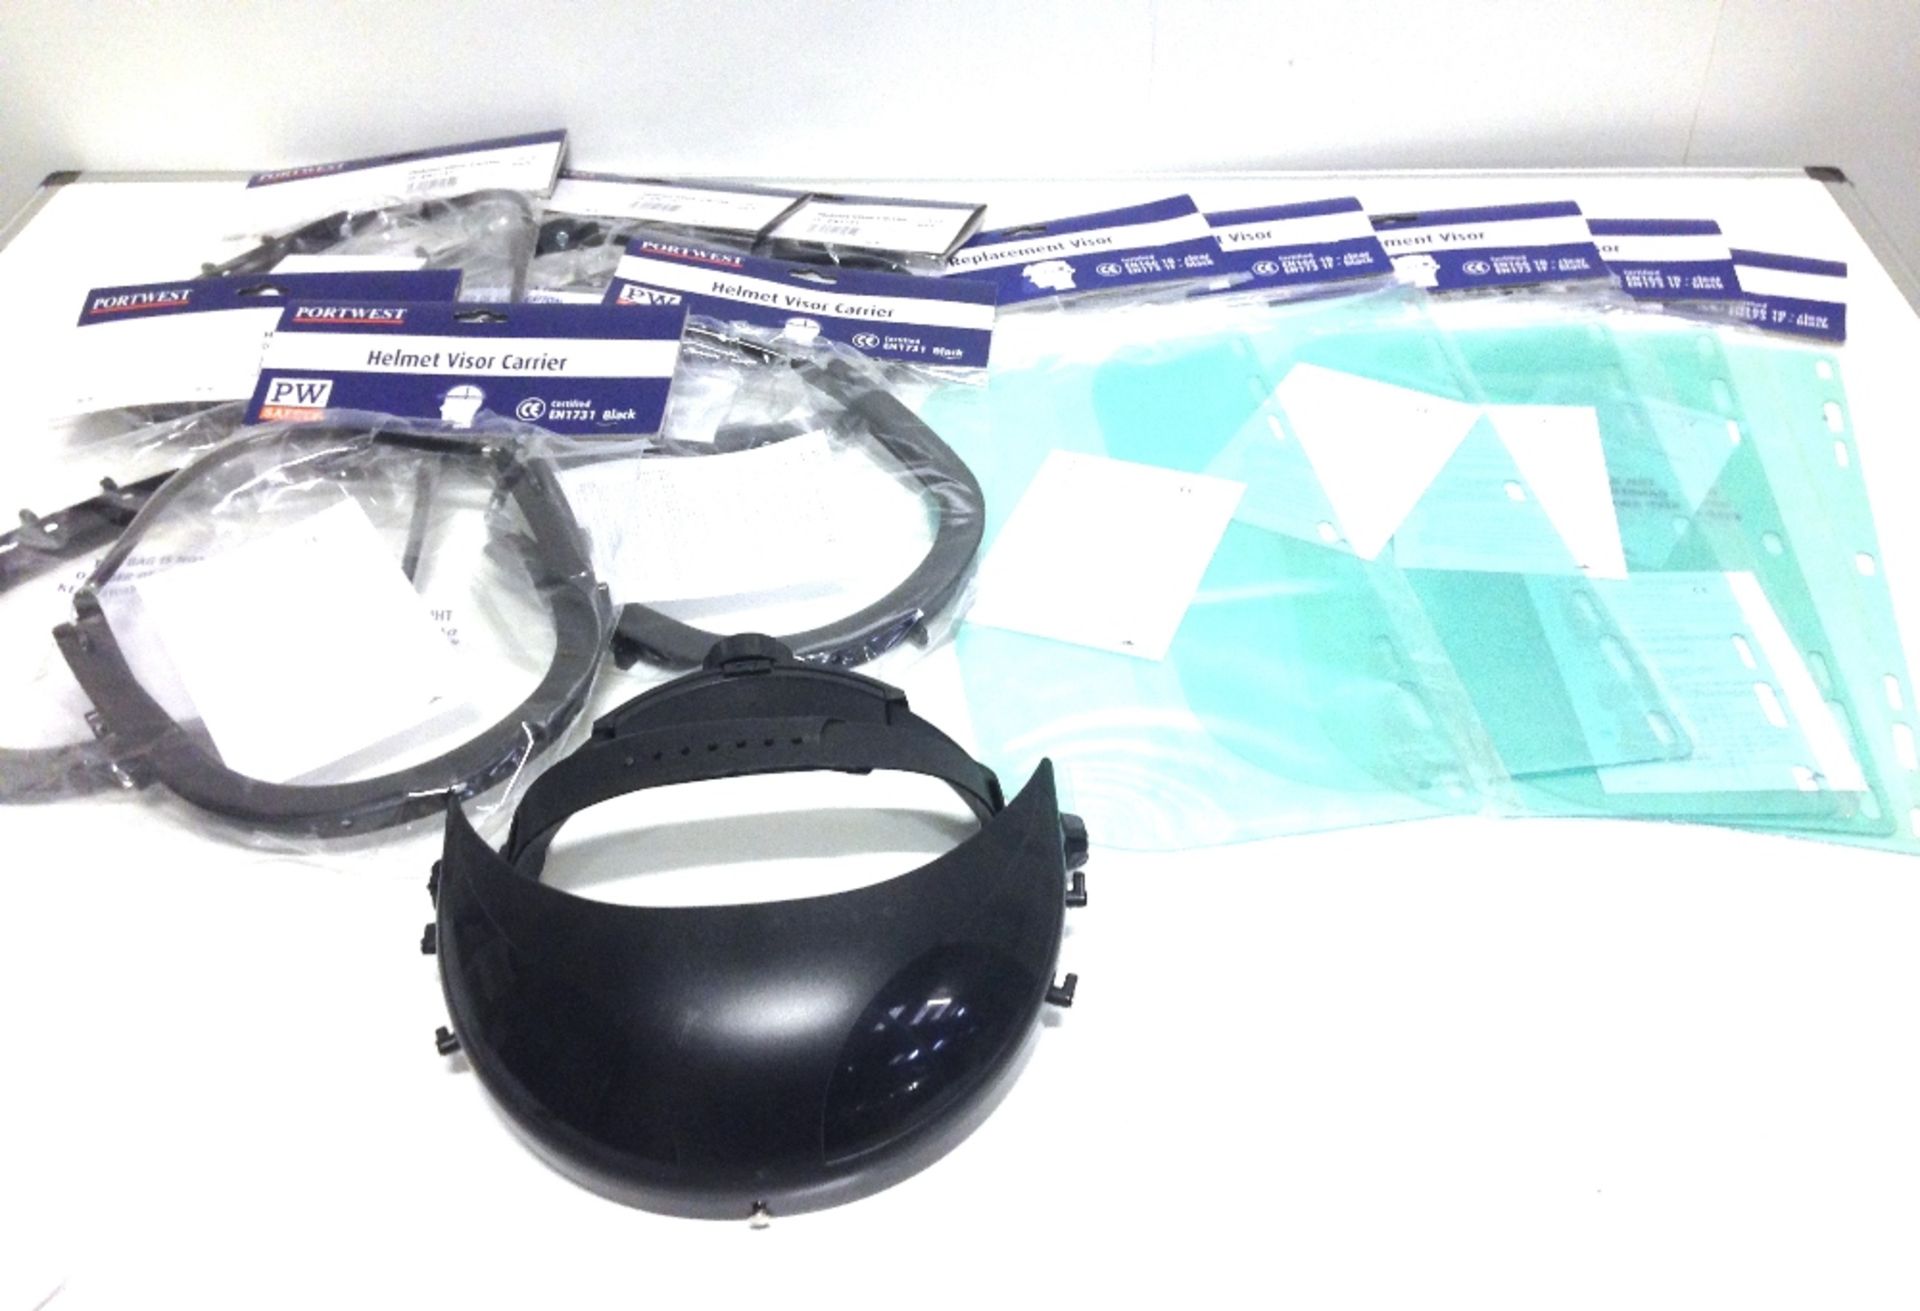 7 x Helmet visor carriers and 5 x replacement visors